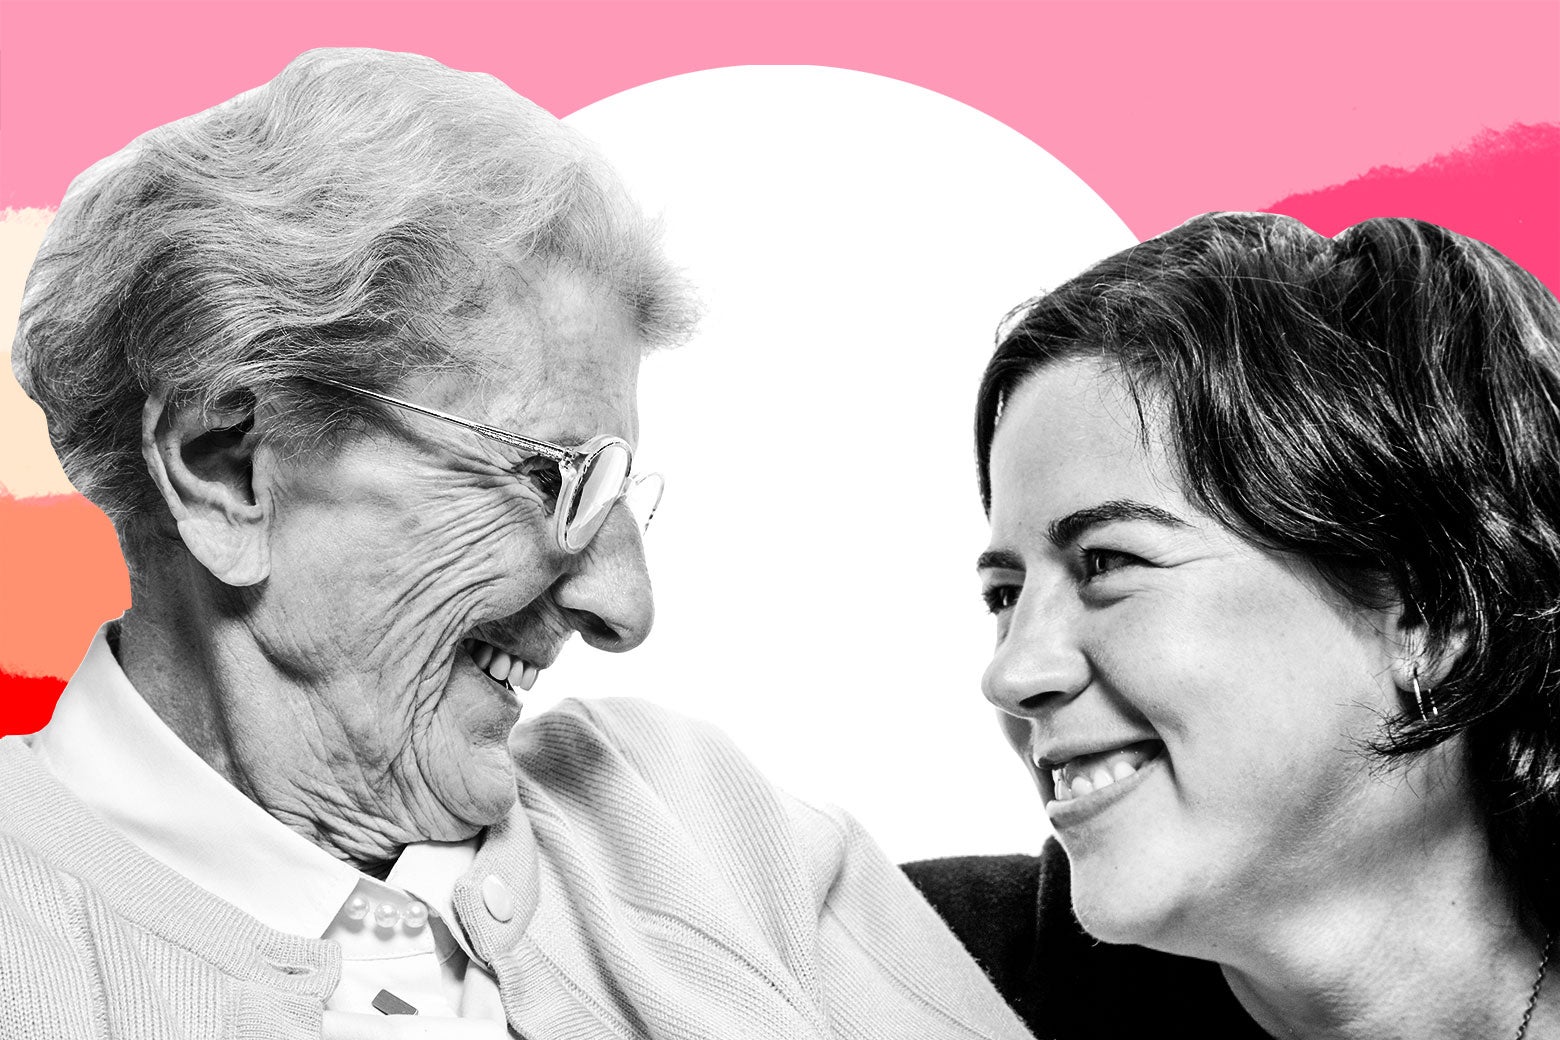 An elderly woman and a 20-something woman smiling and talking.